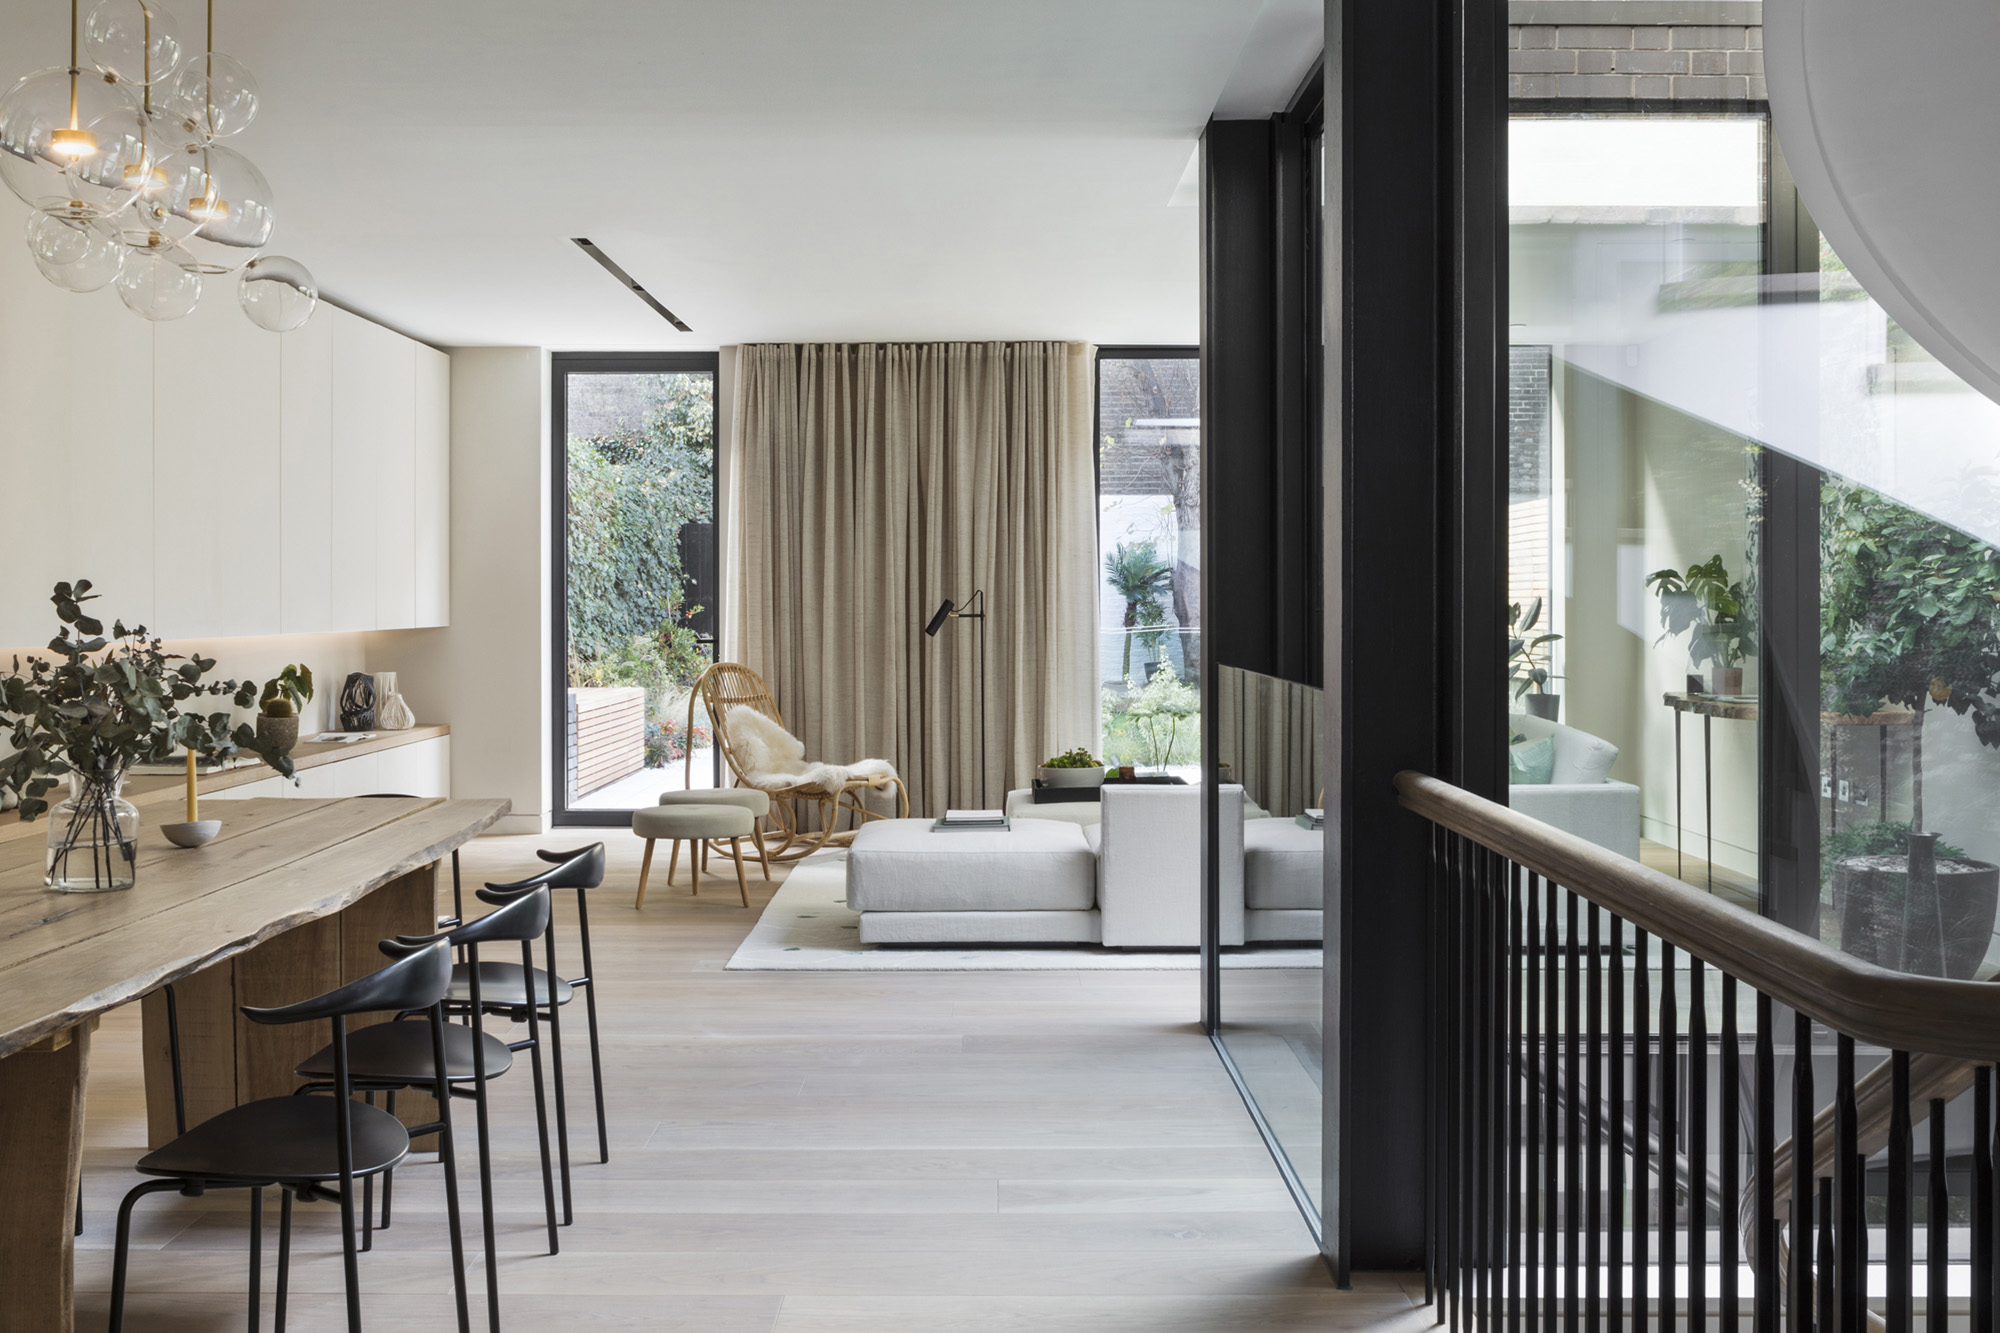 Luxury architecture and interior design in London: Living room of Leverton House by Echlin